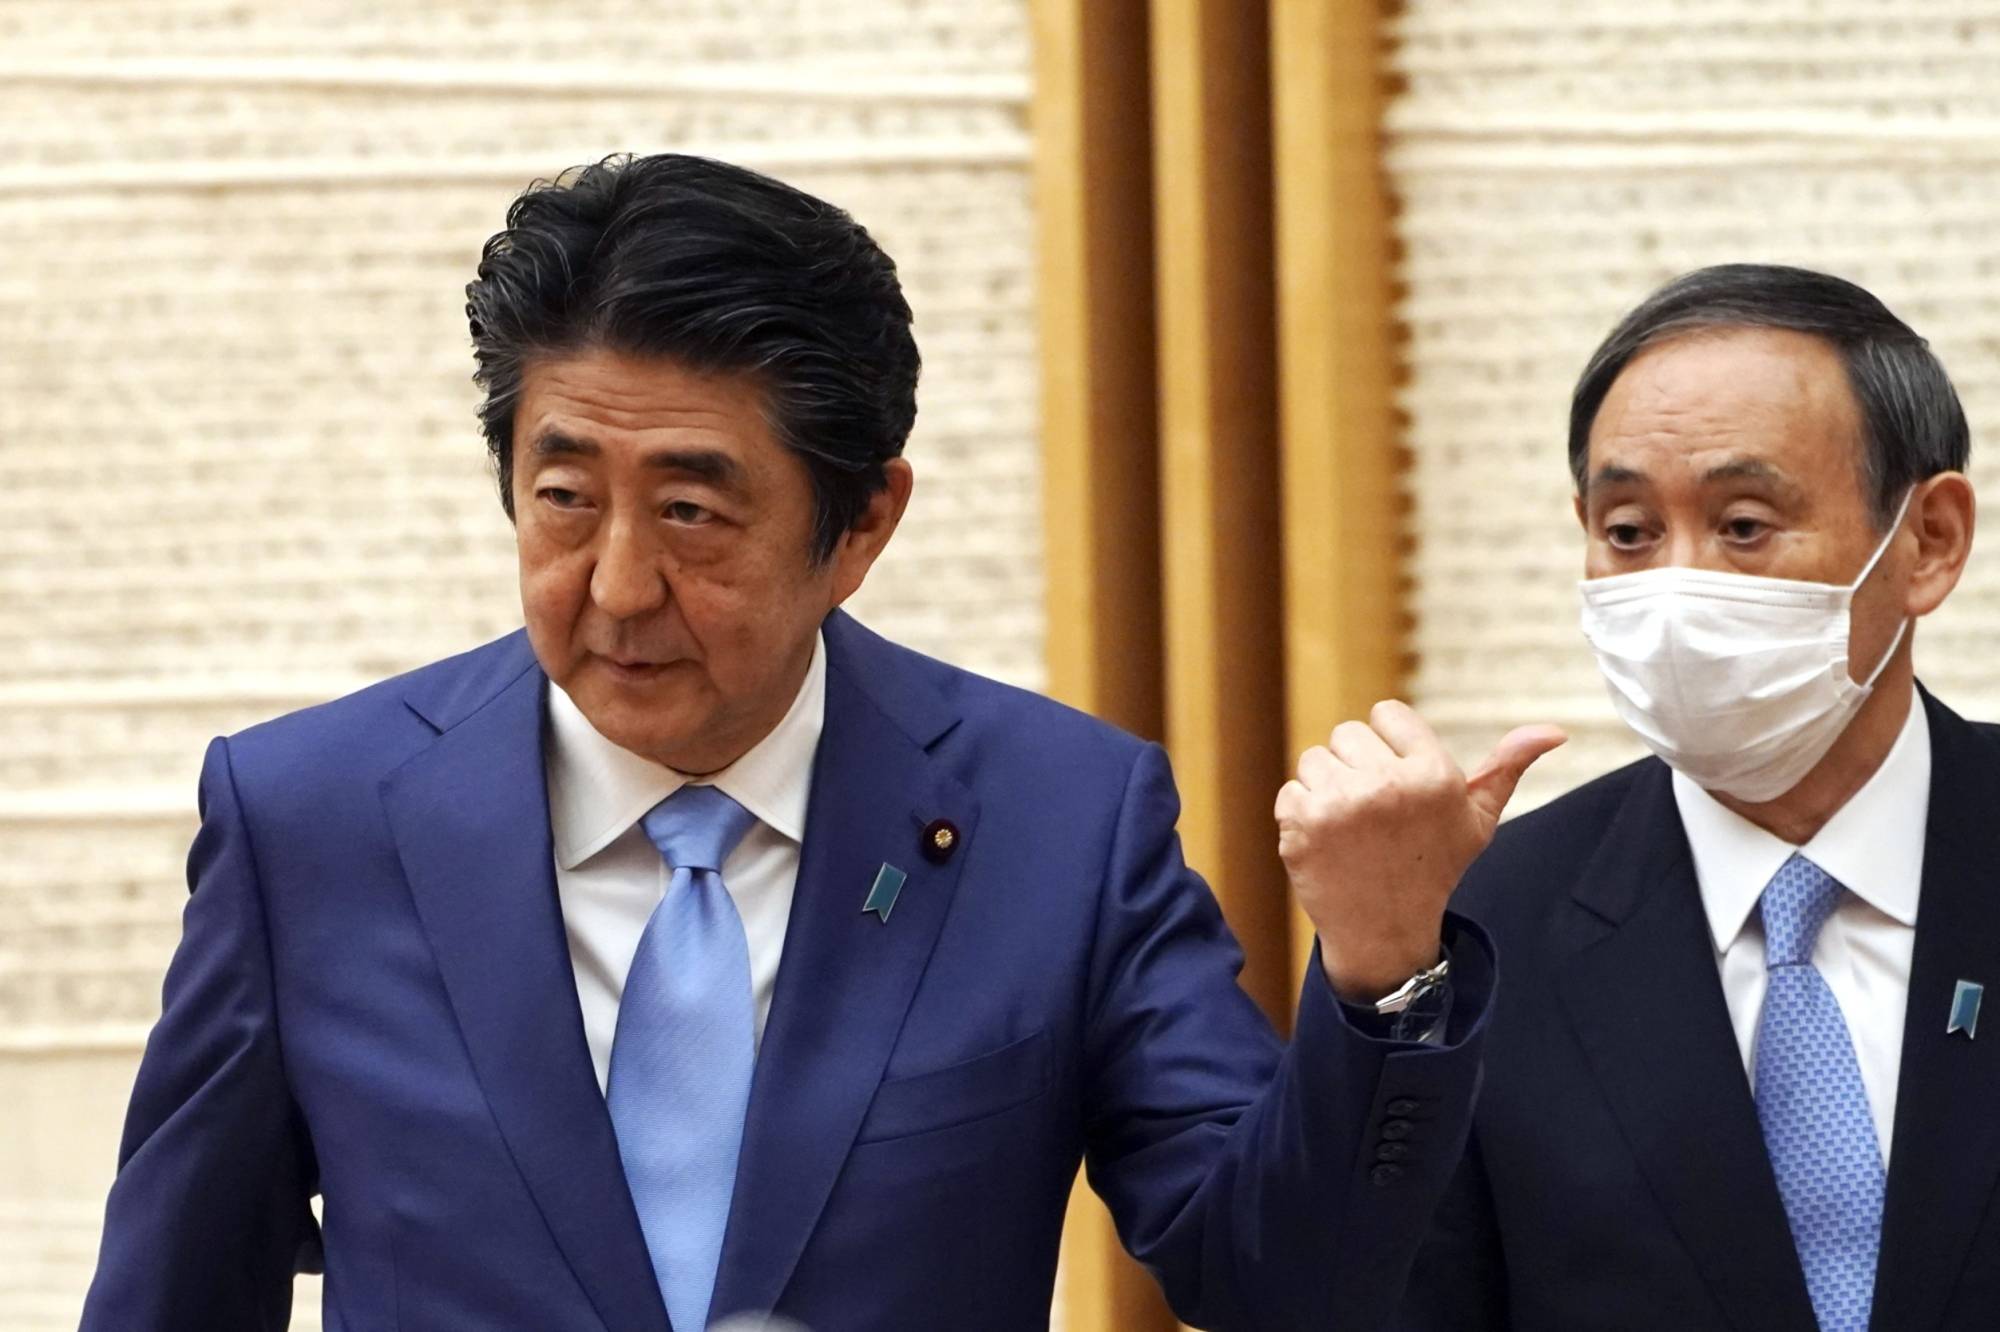 Prime Minister Shinzo Abe (left) and Chief Cabinet Secretary Yoshihide Suga have denied rumors that their long-standing working relationship is on the rocks. | AP / BLOOMBERG